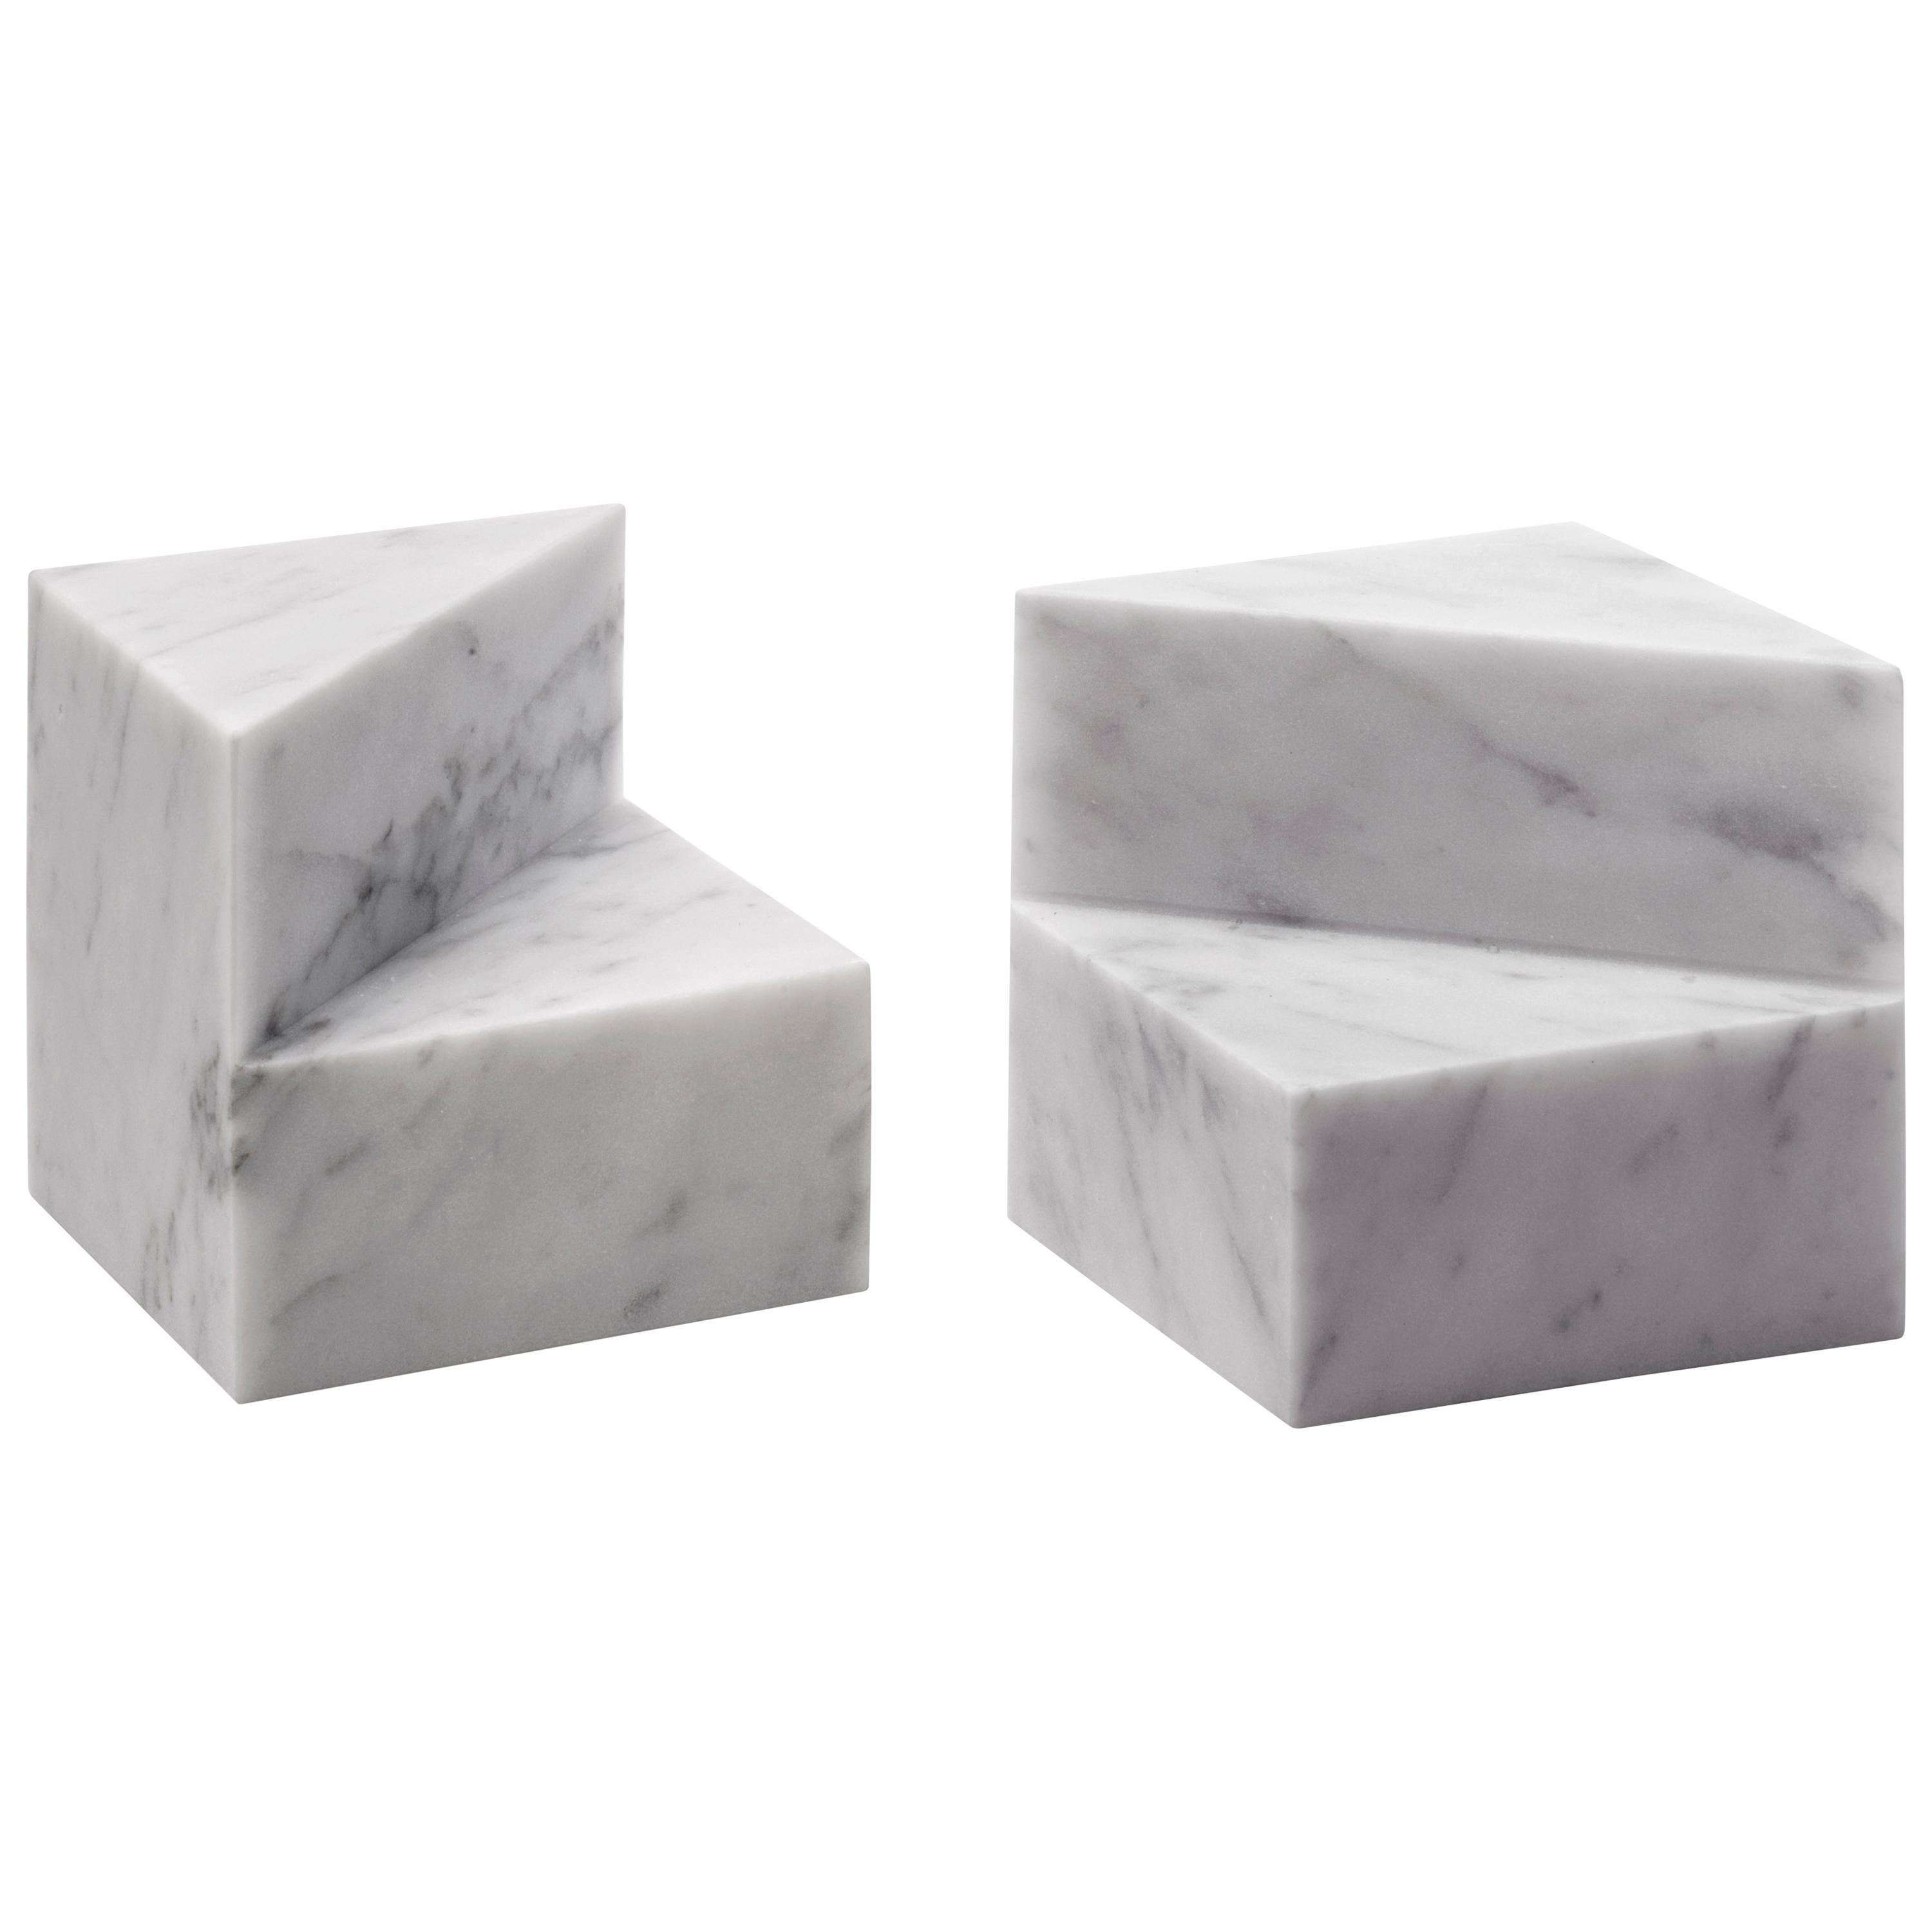 Modern Salvatori Kilos Cube Paperweight in Bianco Carrara Marble by Elisa Ossino For Sale